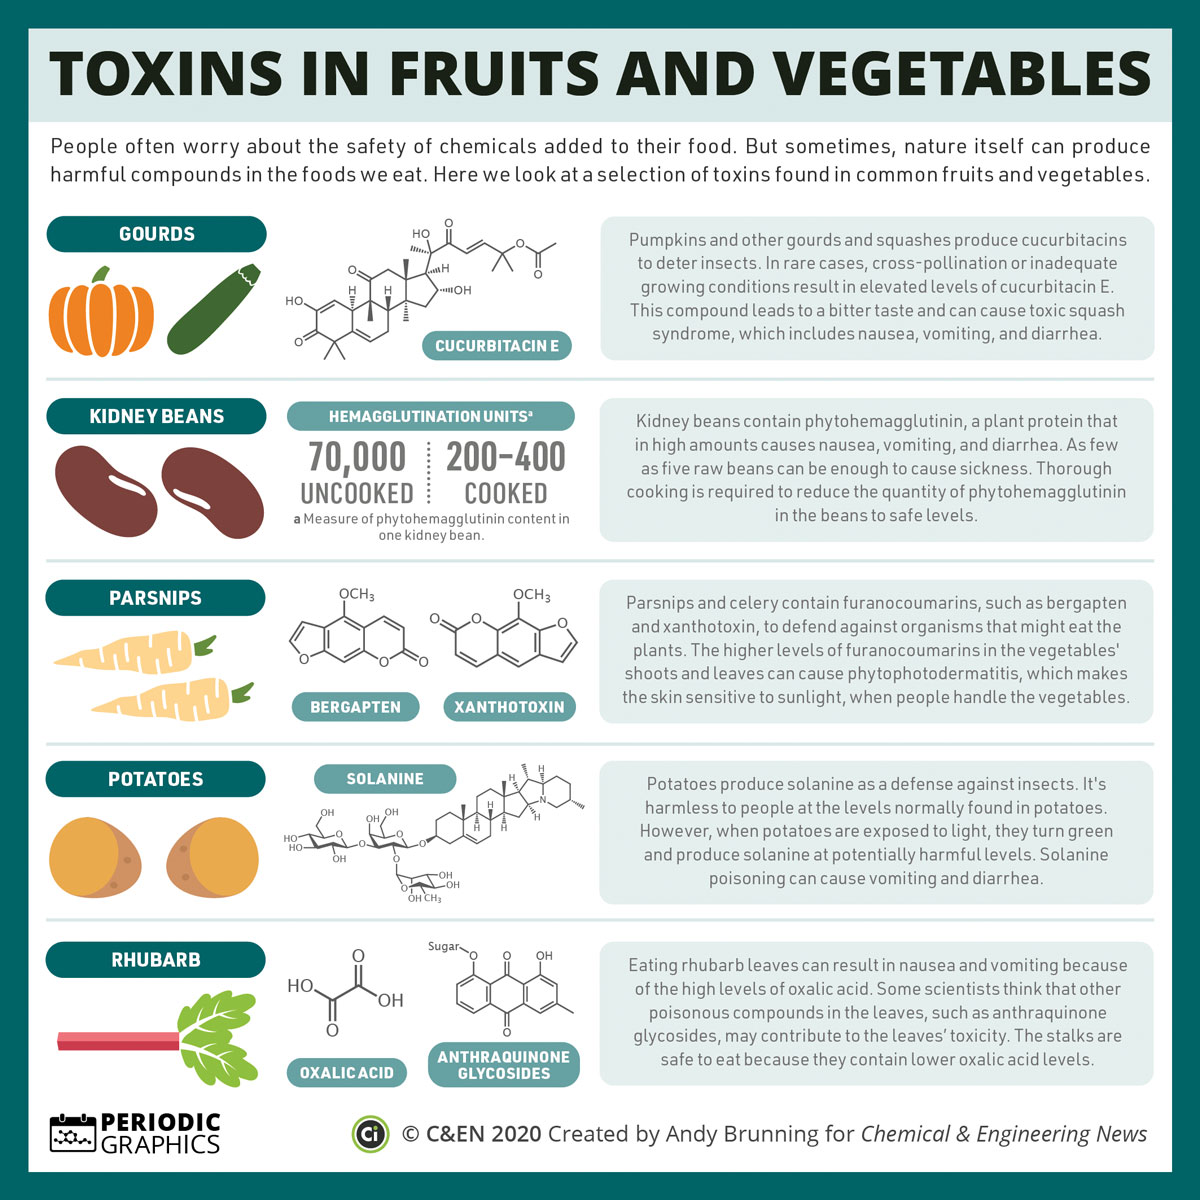 Five-panel infographic looks at various naturally occurring toxins found in some vegetables.